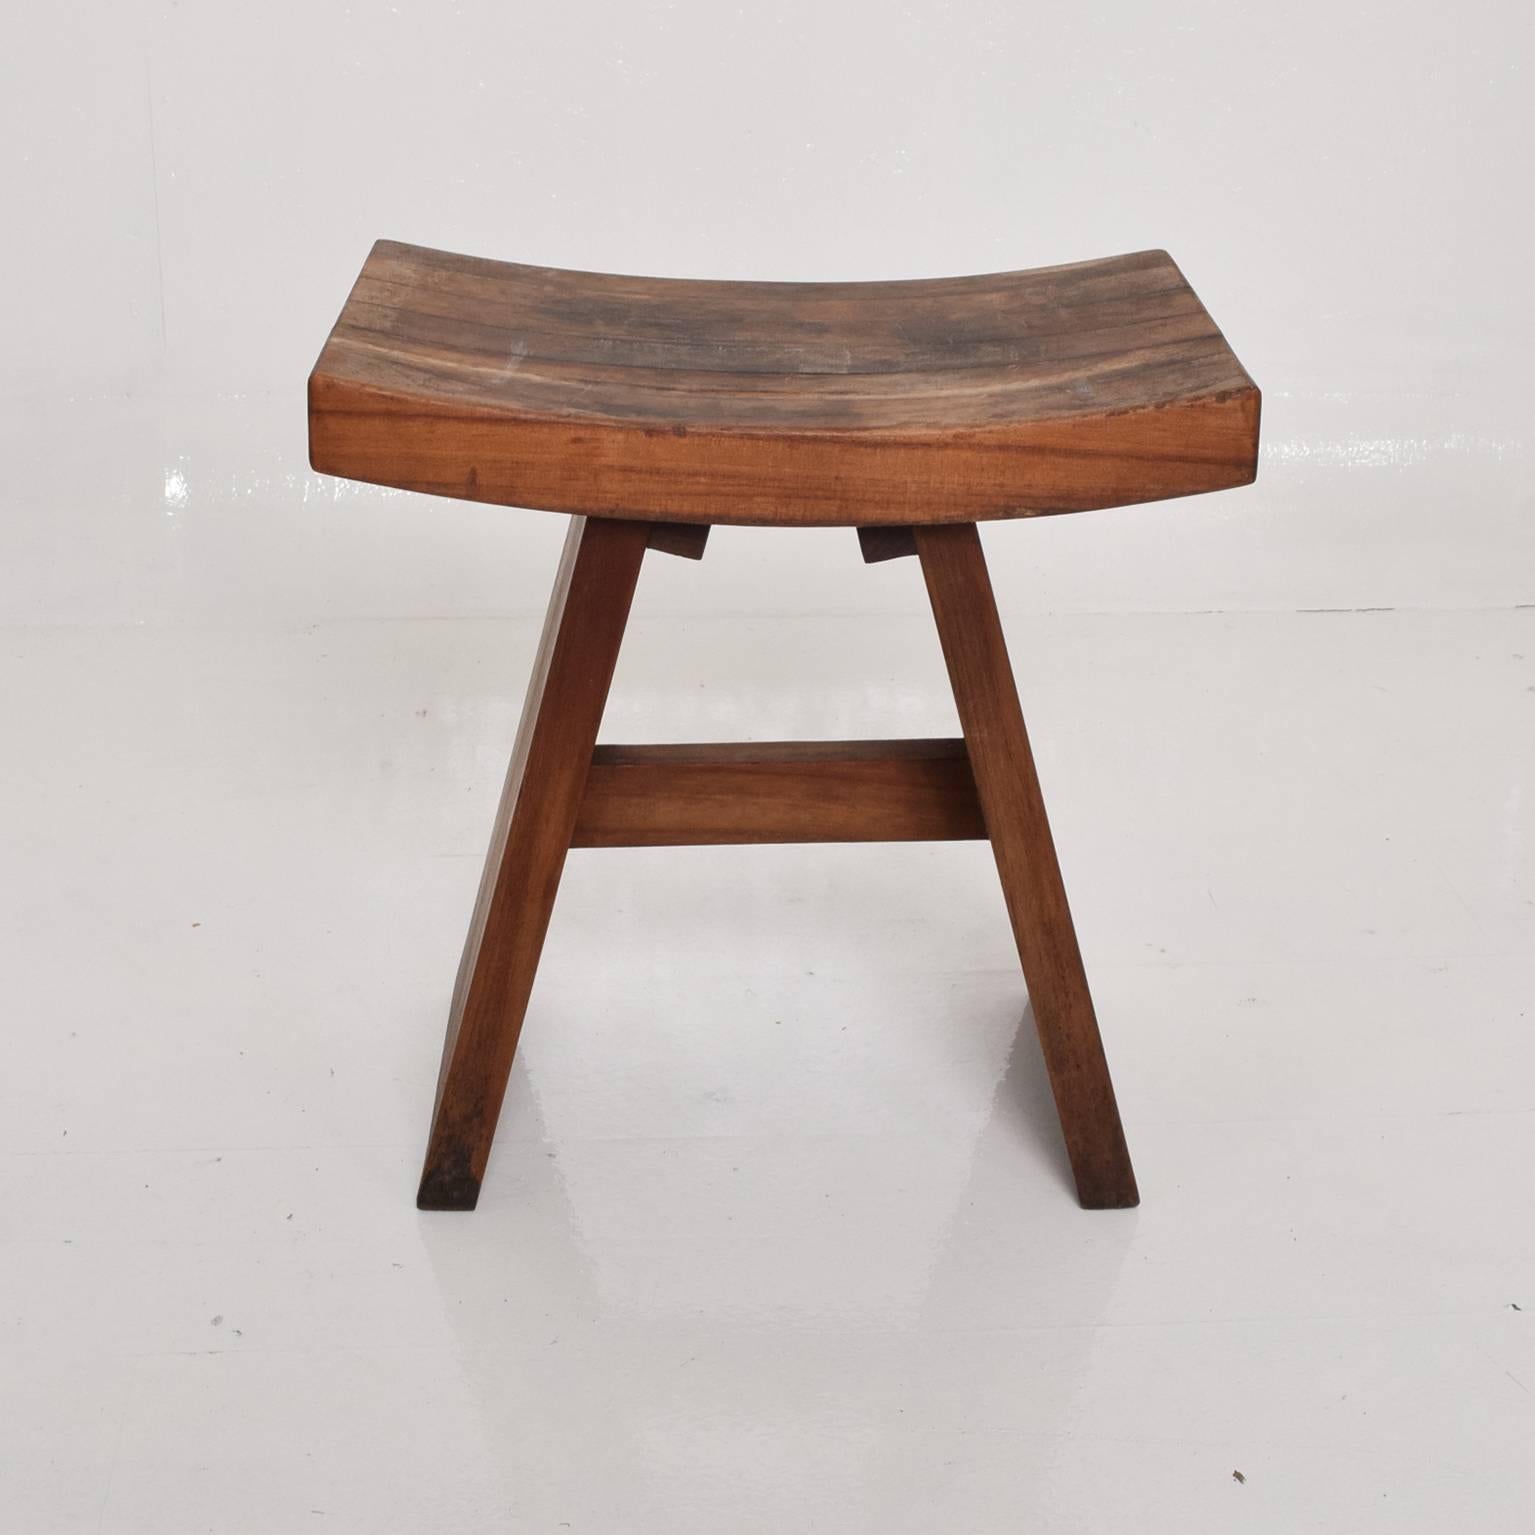 A custom stool in walnut. Unique construction. Sculptural shape. 
Unmarked, no information on the maker. 

Dimensions: 18 1/4" H x 18" W x 12"D